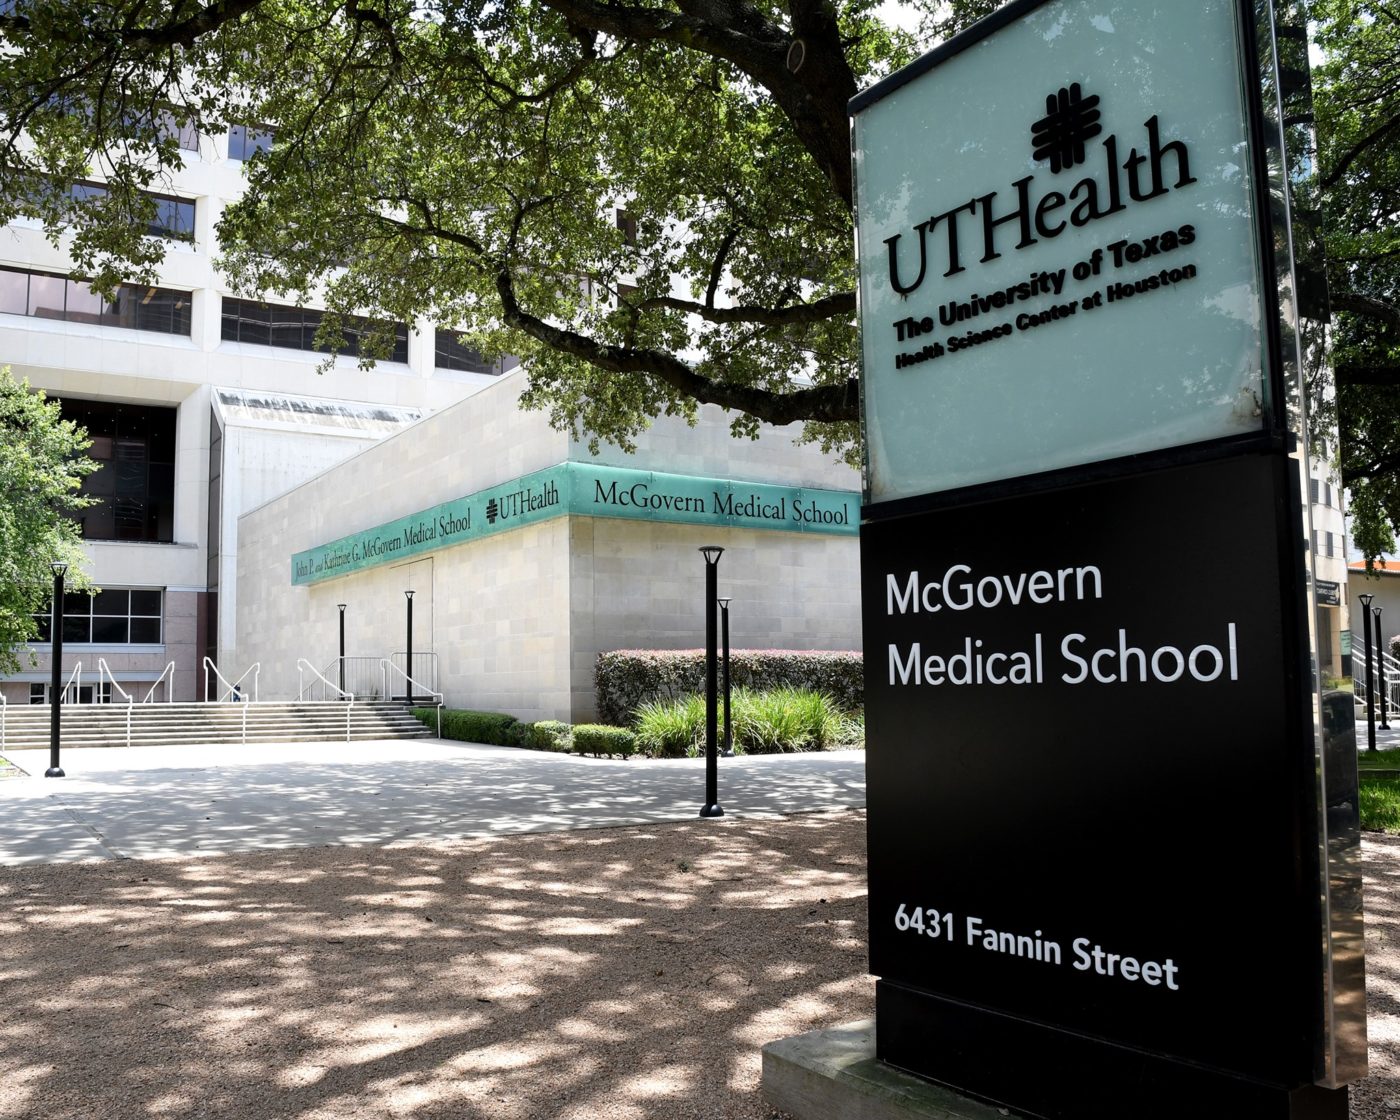 How-to-Get-Into-McGovern-Medical-School-at-UT-Health-The-Definitive-Guide.jpg